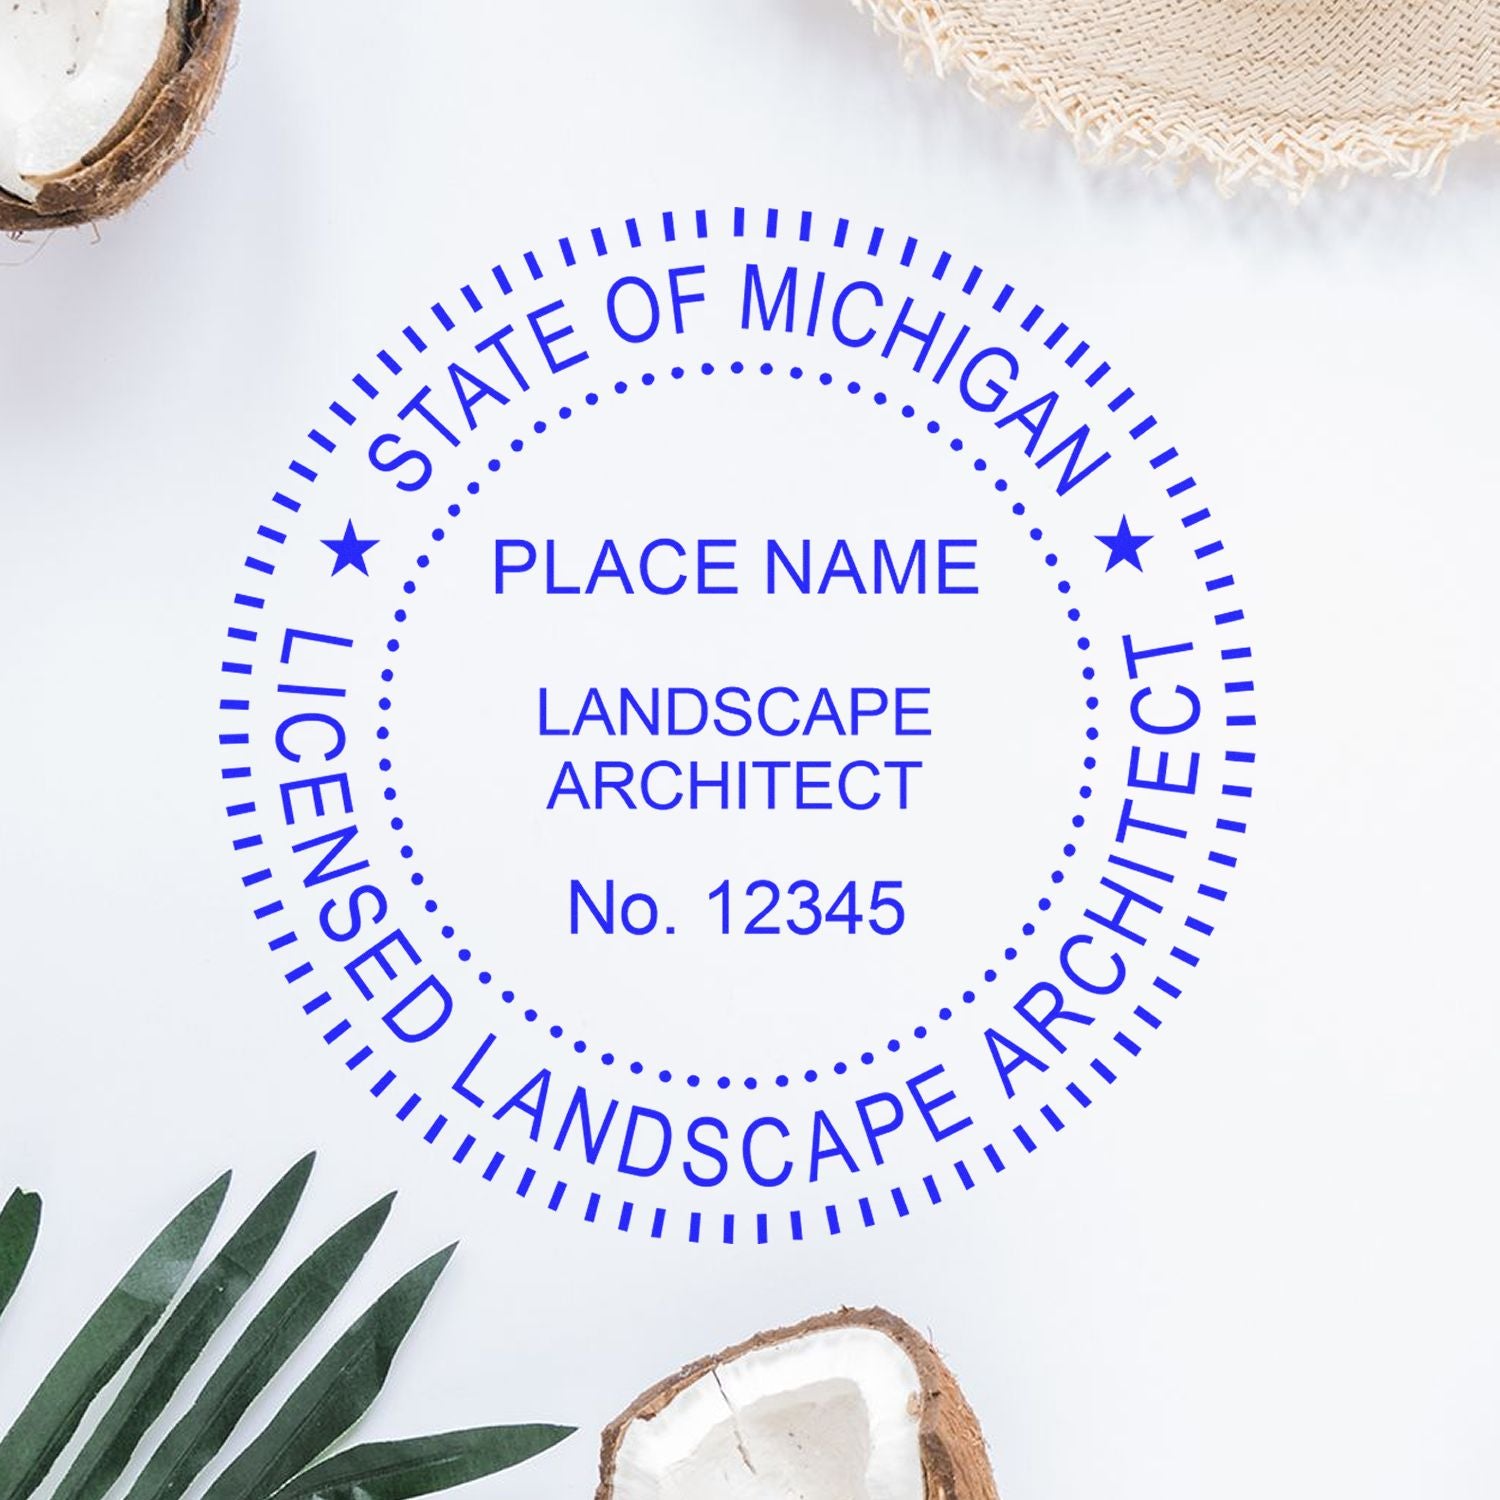 The Digital Michigan Landscape Architect Stamp stamp impression comes to life with a crisp, detailed photo on paper - showcasing true professional quality.